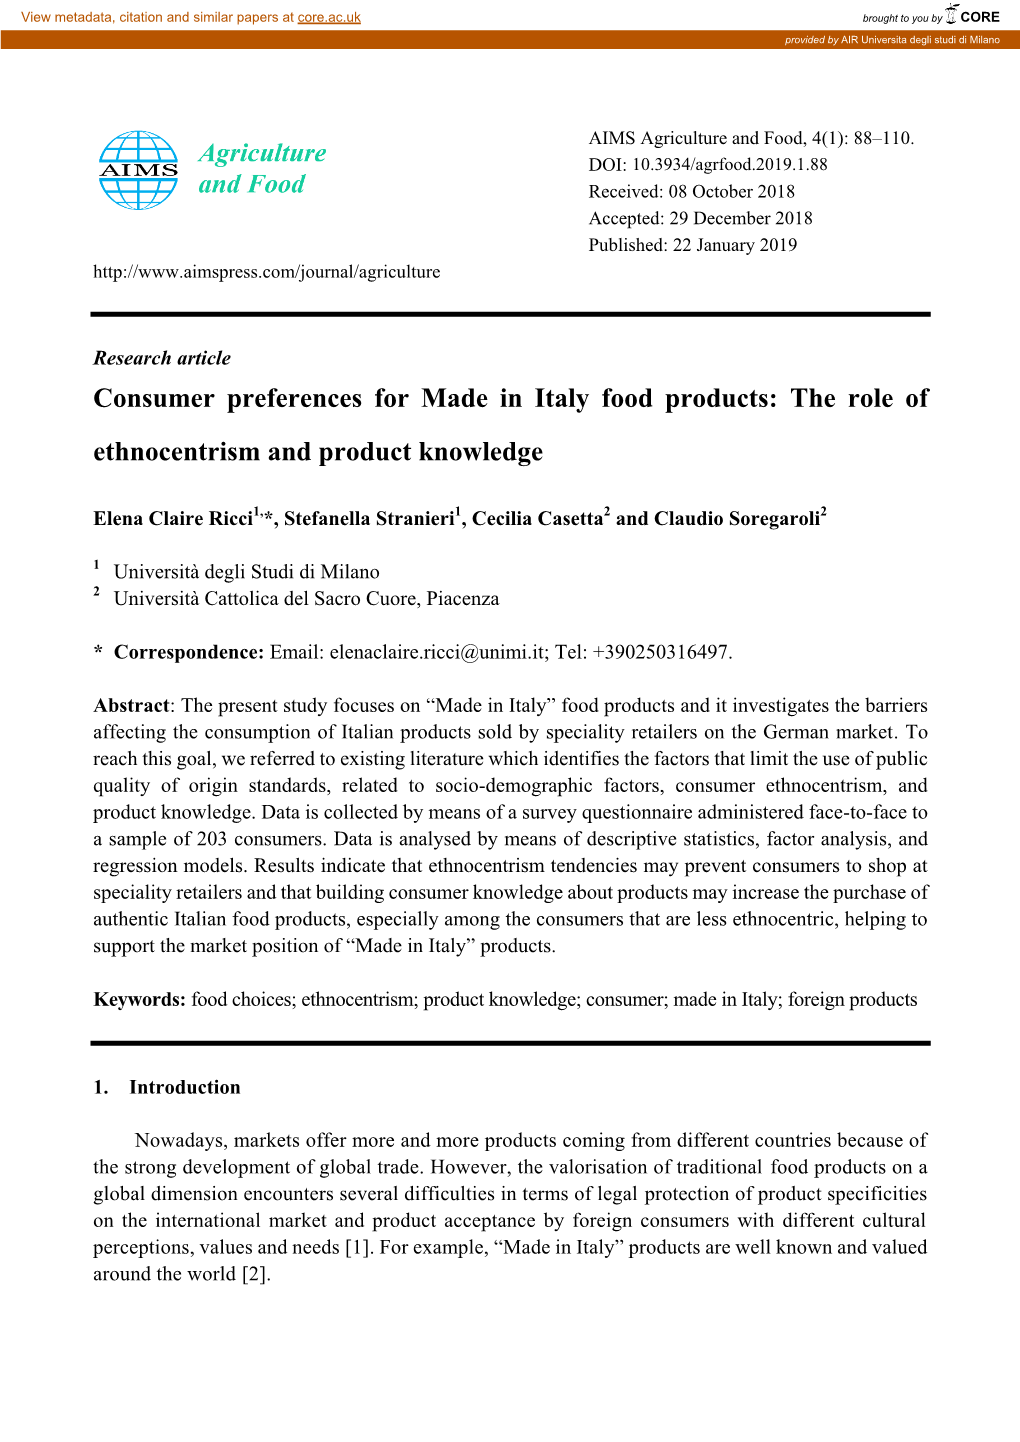 Consumer Preferences for Made in Italy Food Products: the Role of Ethnocentrism and Product Knowledge